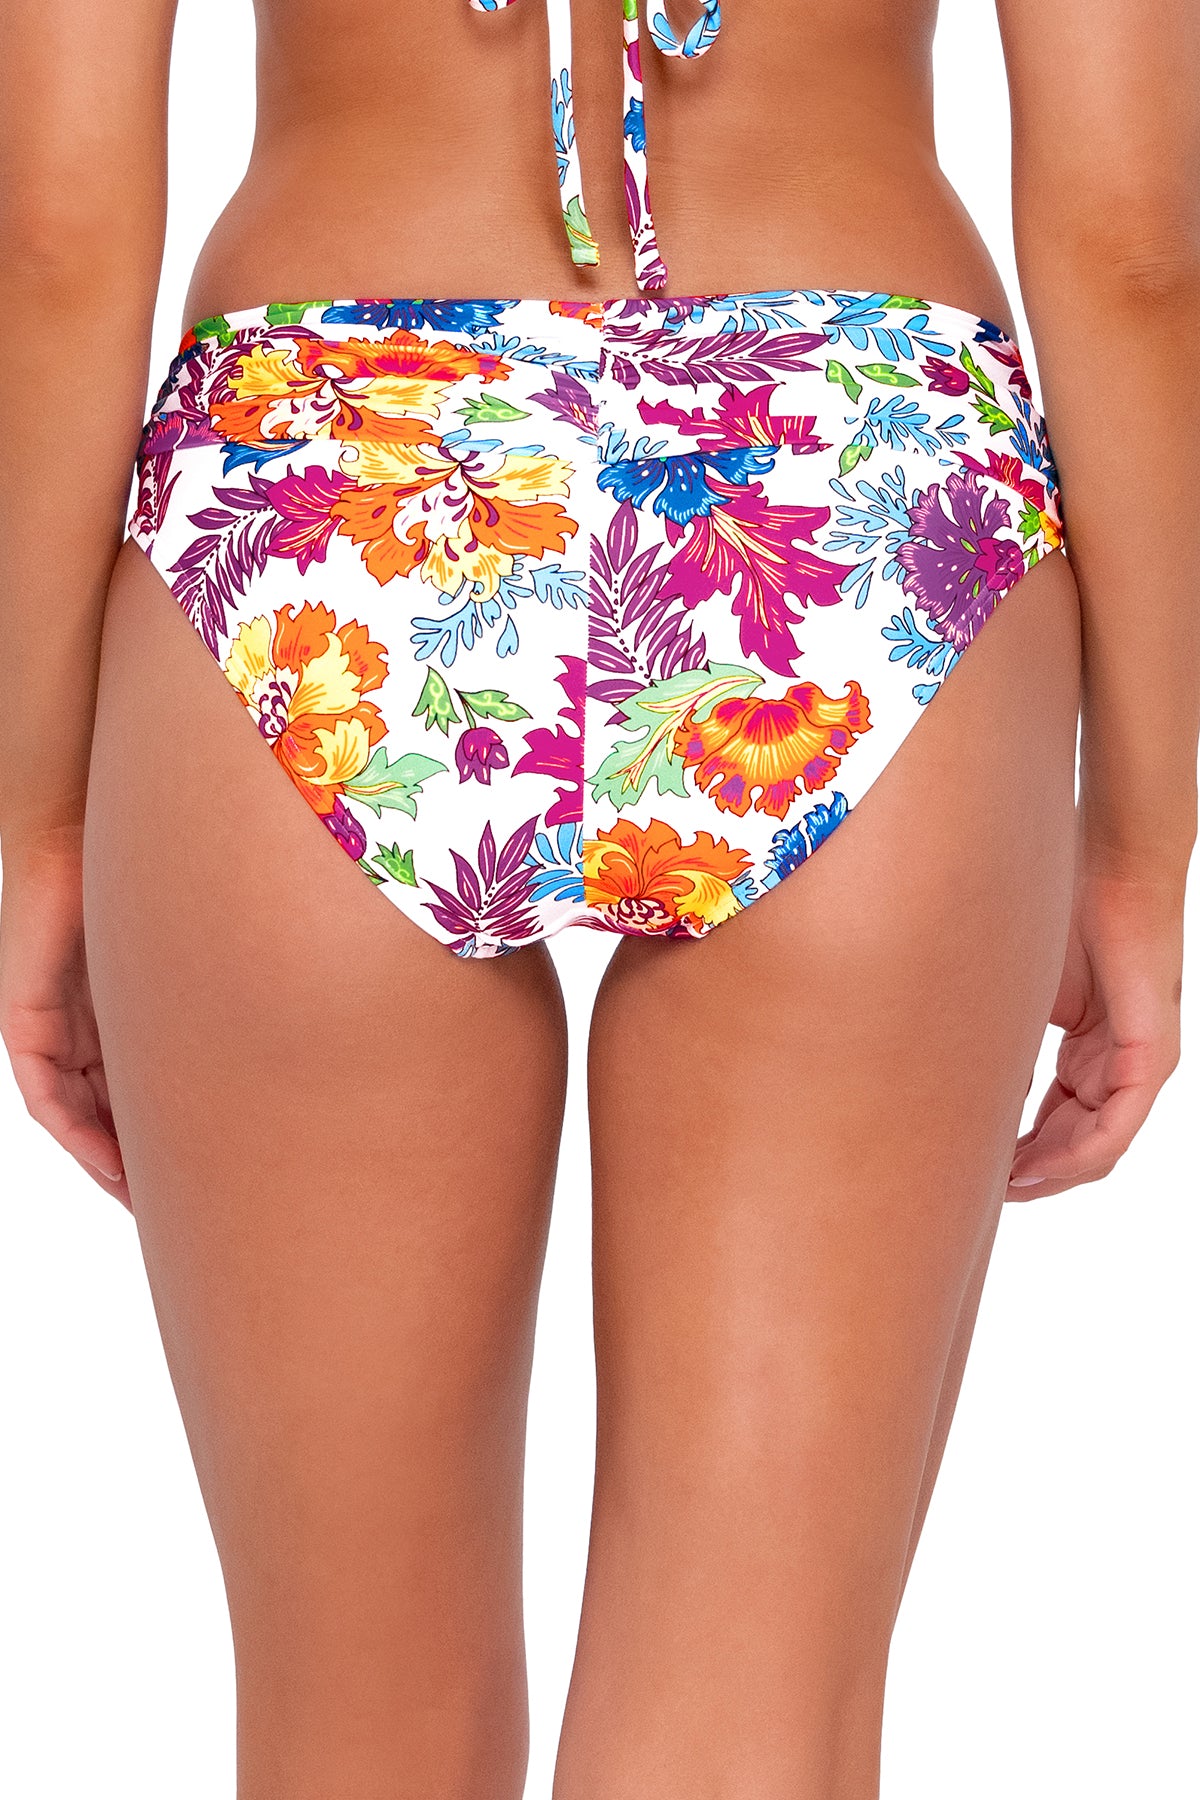 Back pose #1 of Daria wearing Sunsets Camilla Flora Unforgettable Bottom